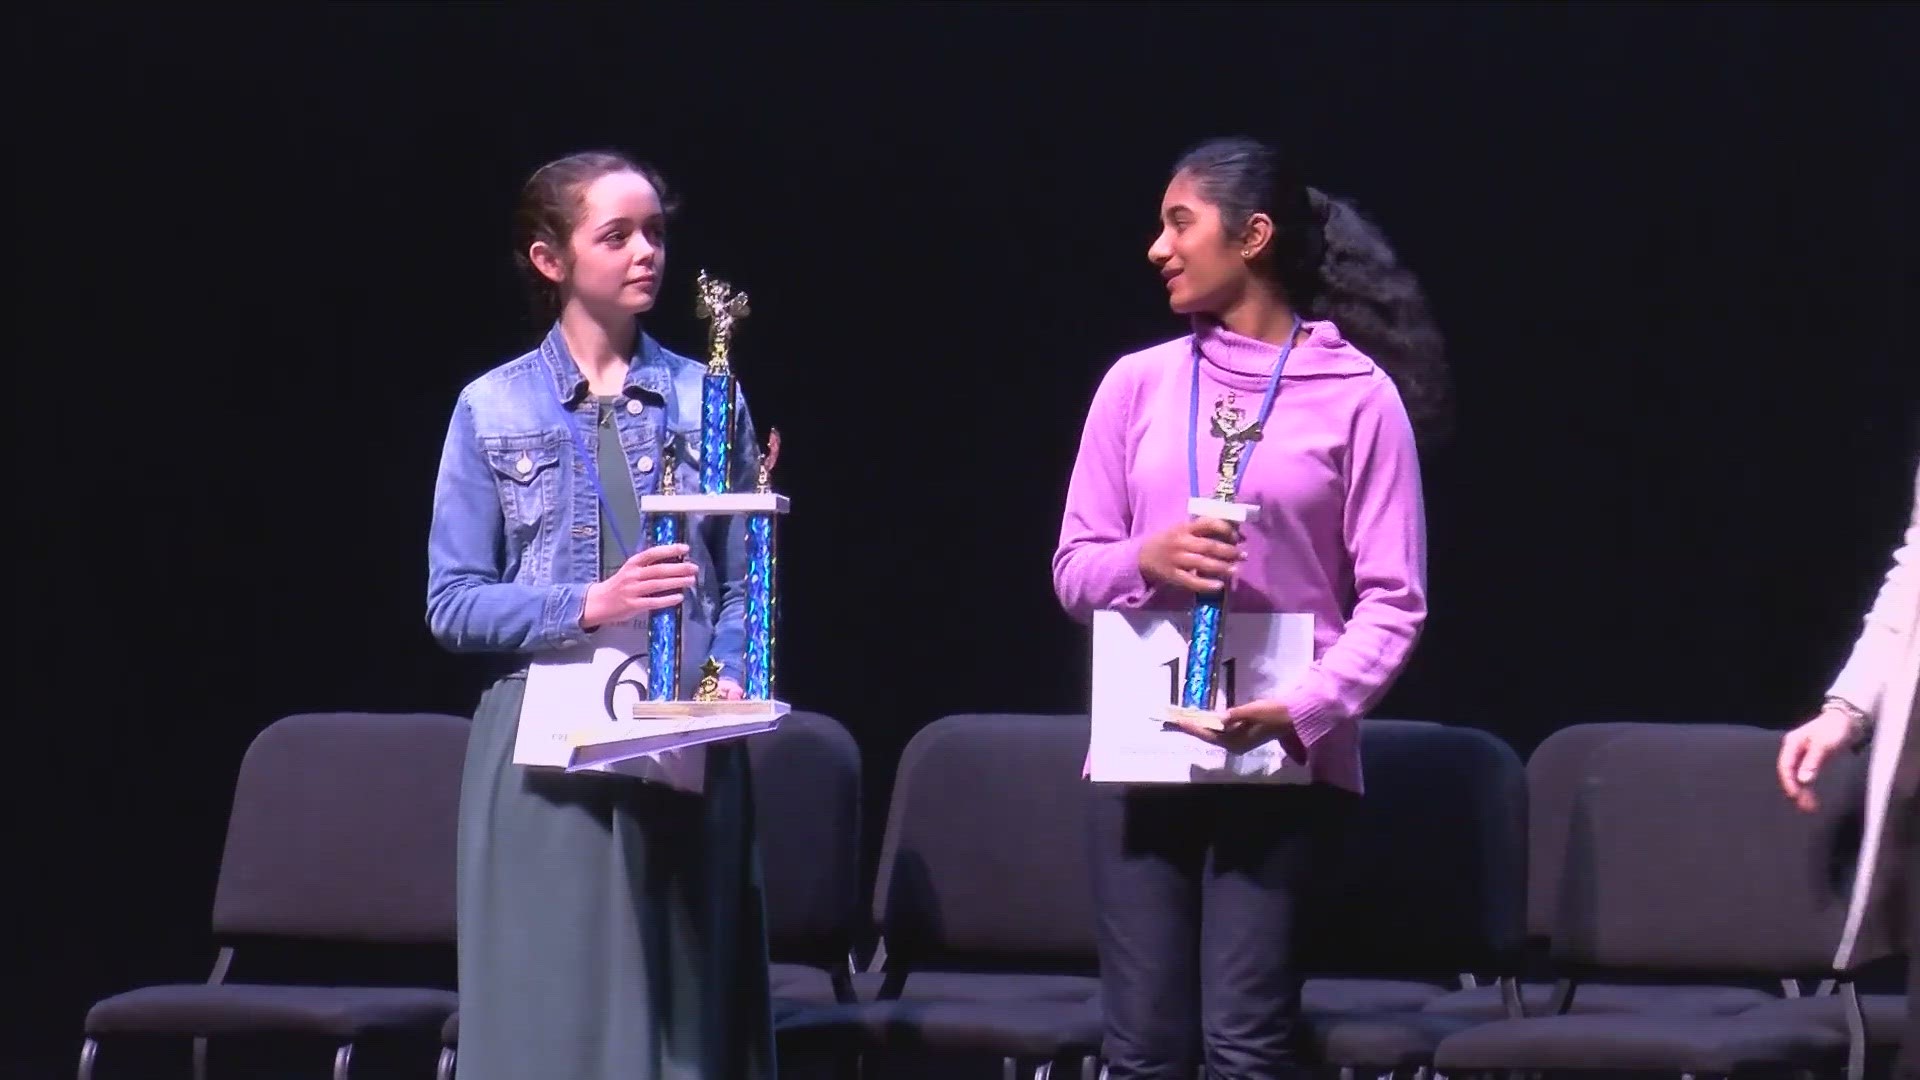 Twenty-three students from across the area were competing for a trip to the Scripps Howard National Spelling Bee in May.